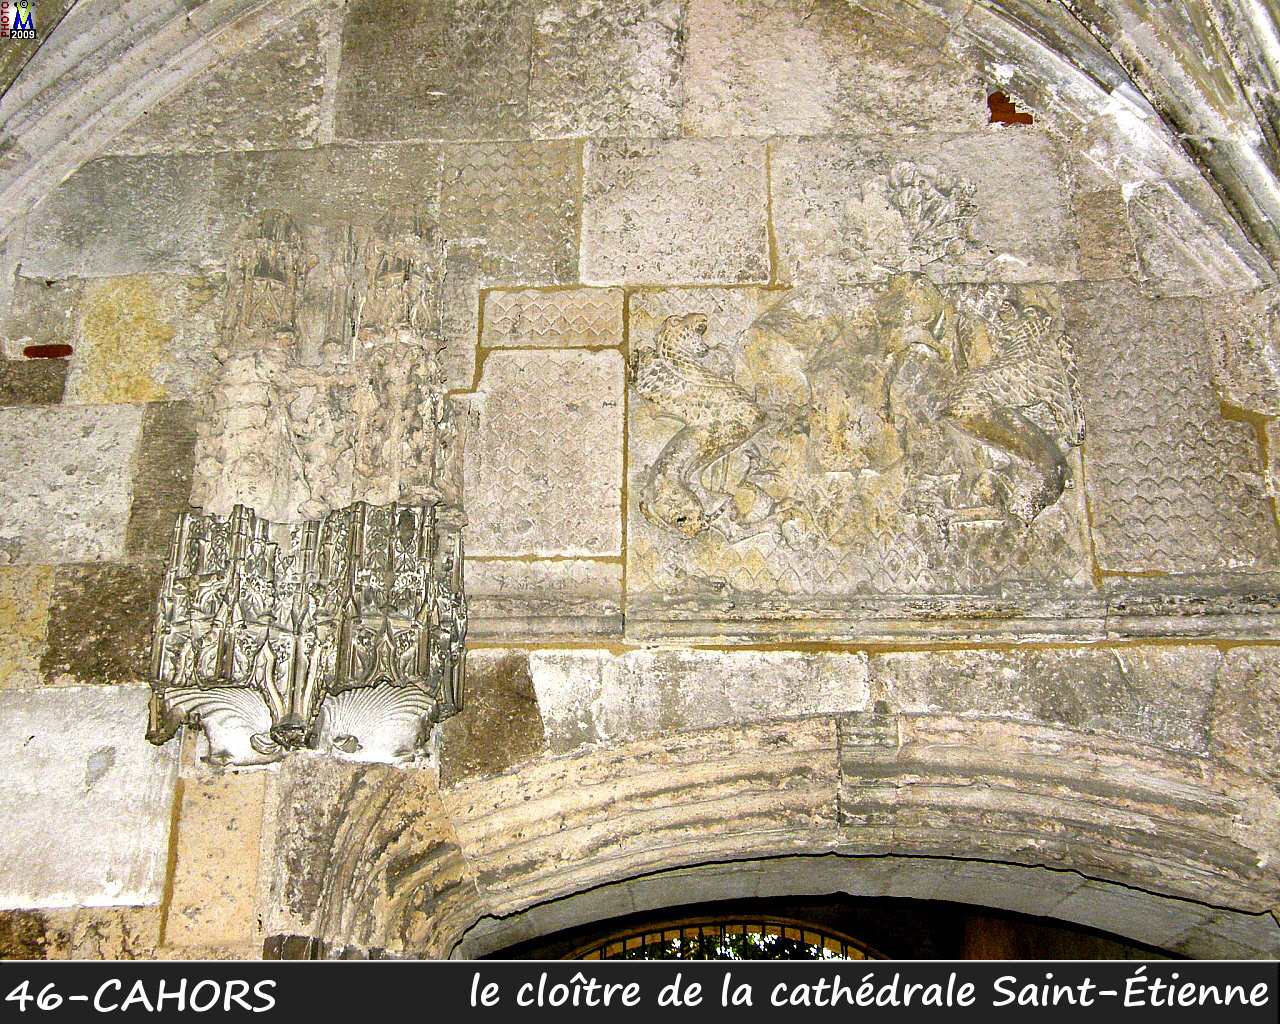 46CAHORS_cathedrale_322.jpg